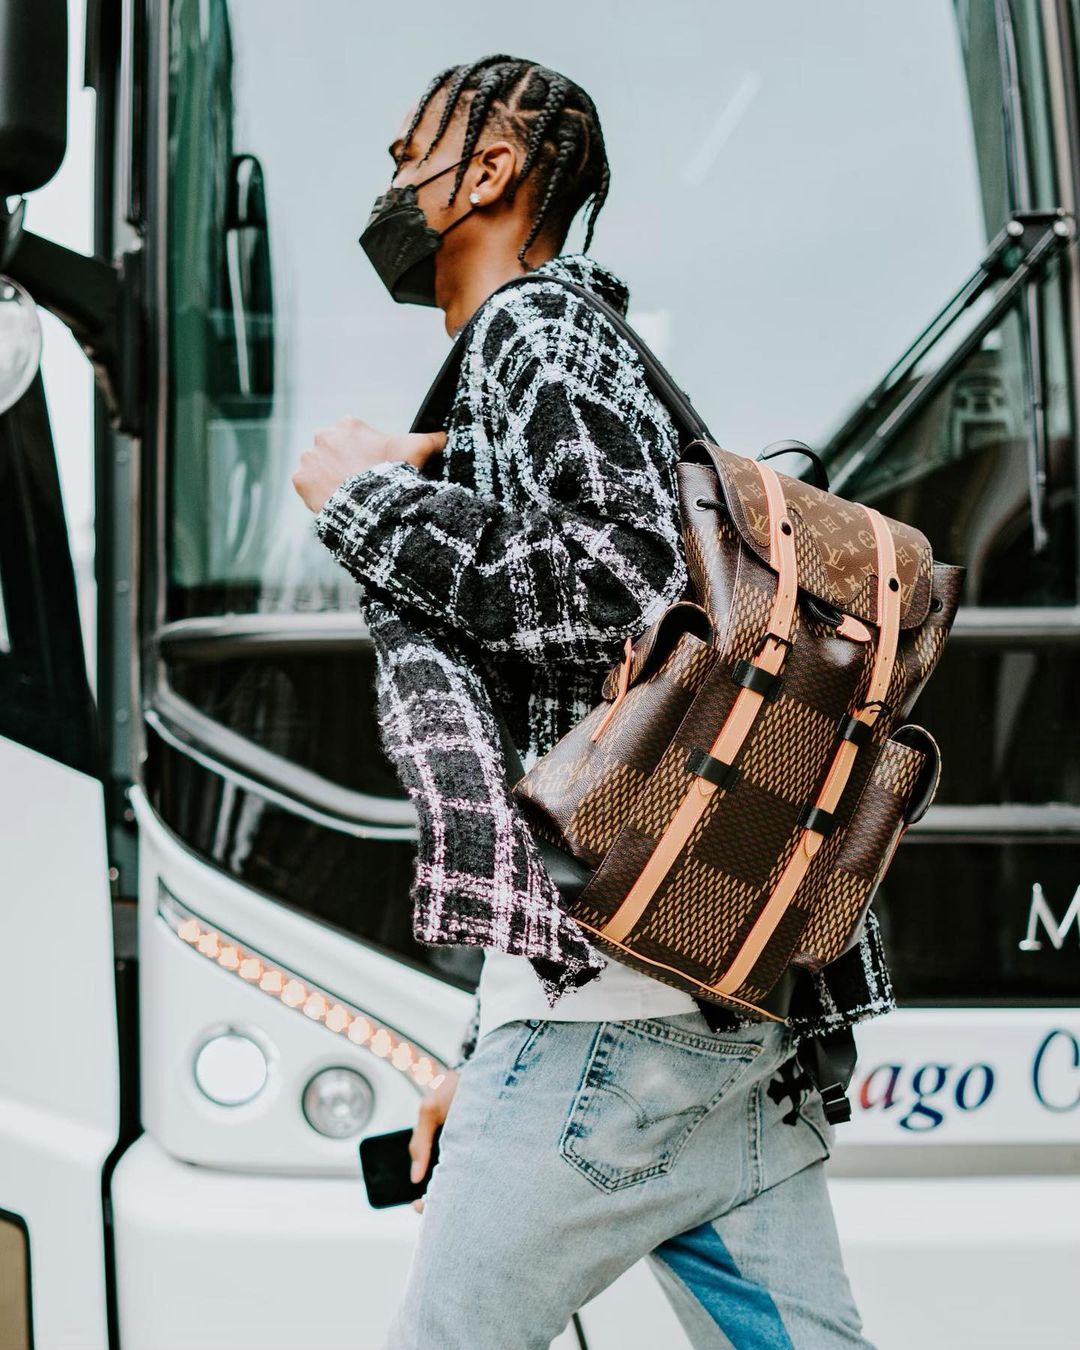 SPOTTED: Shai Gilgeous-Alexander Goes Loco for Luxury Wearing Rick Owens,  Givenchy, Balenciaga & more – PAUSE Online